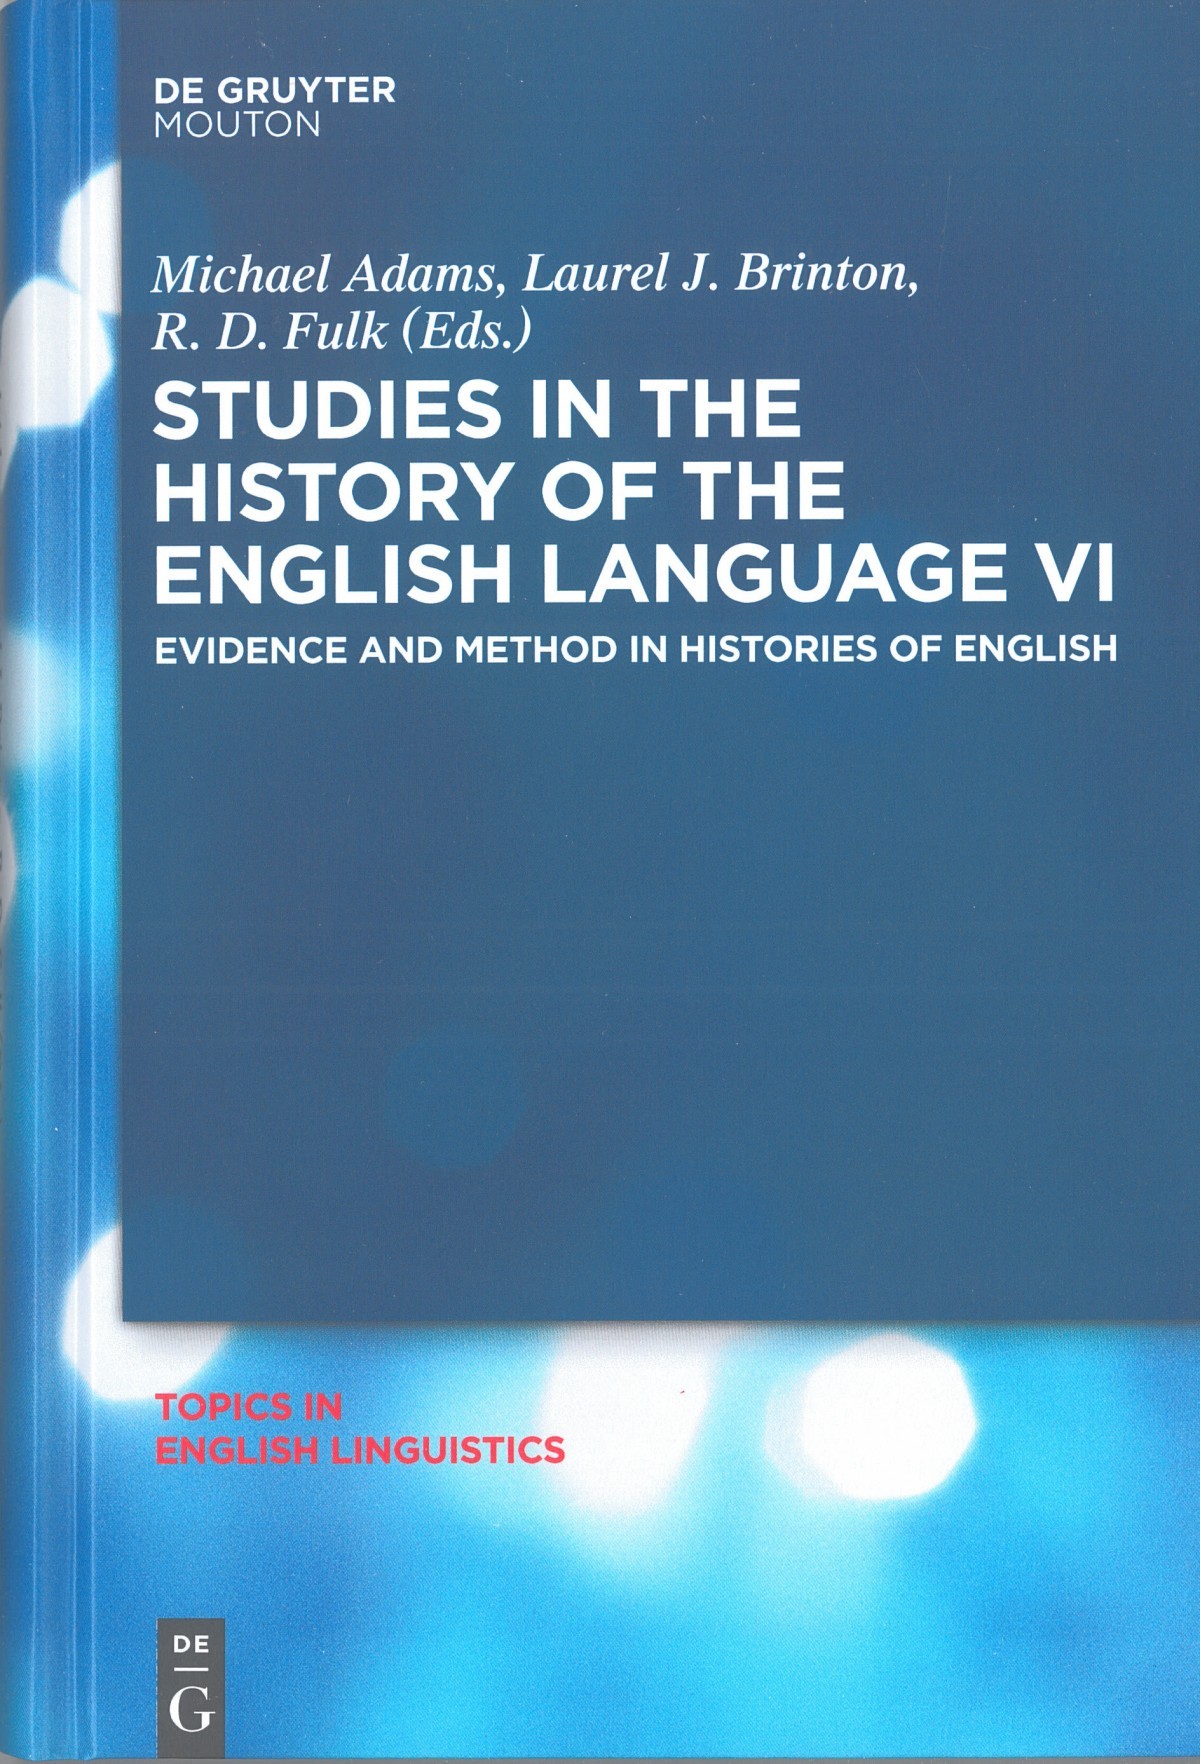 Studies in the History of the English Language VI: Evidence and Method in Histories of English